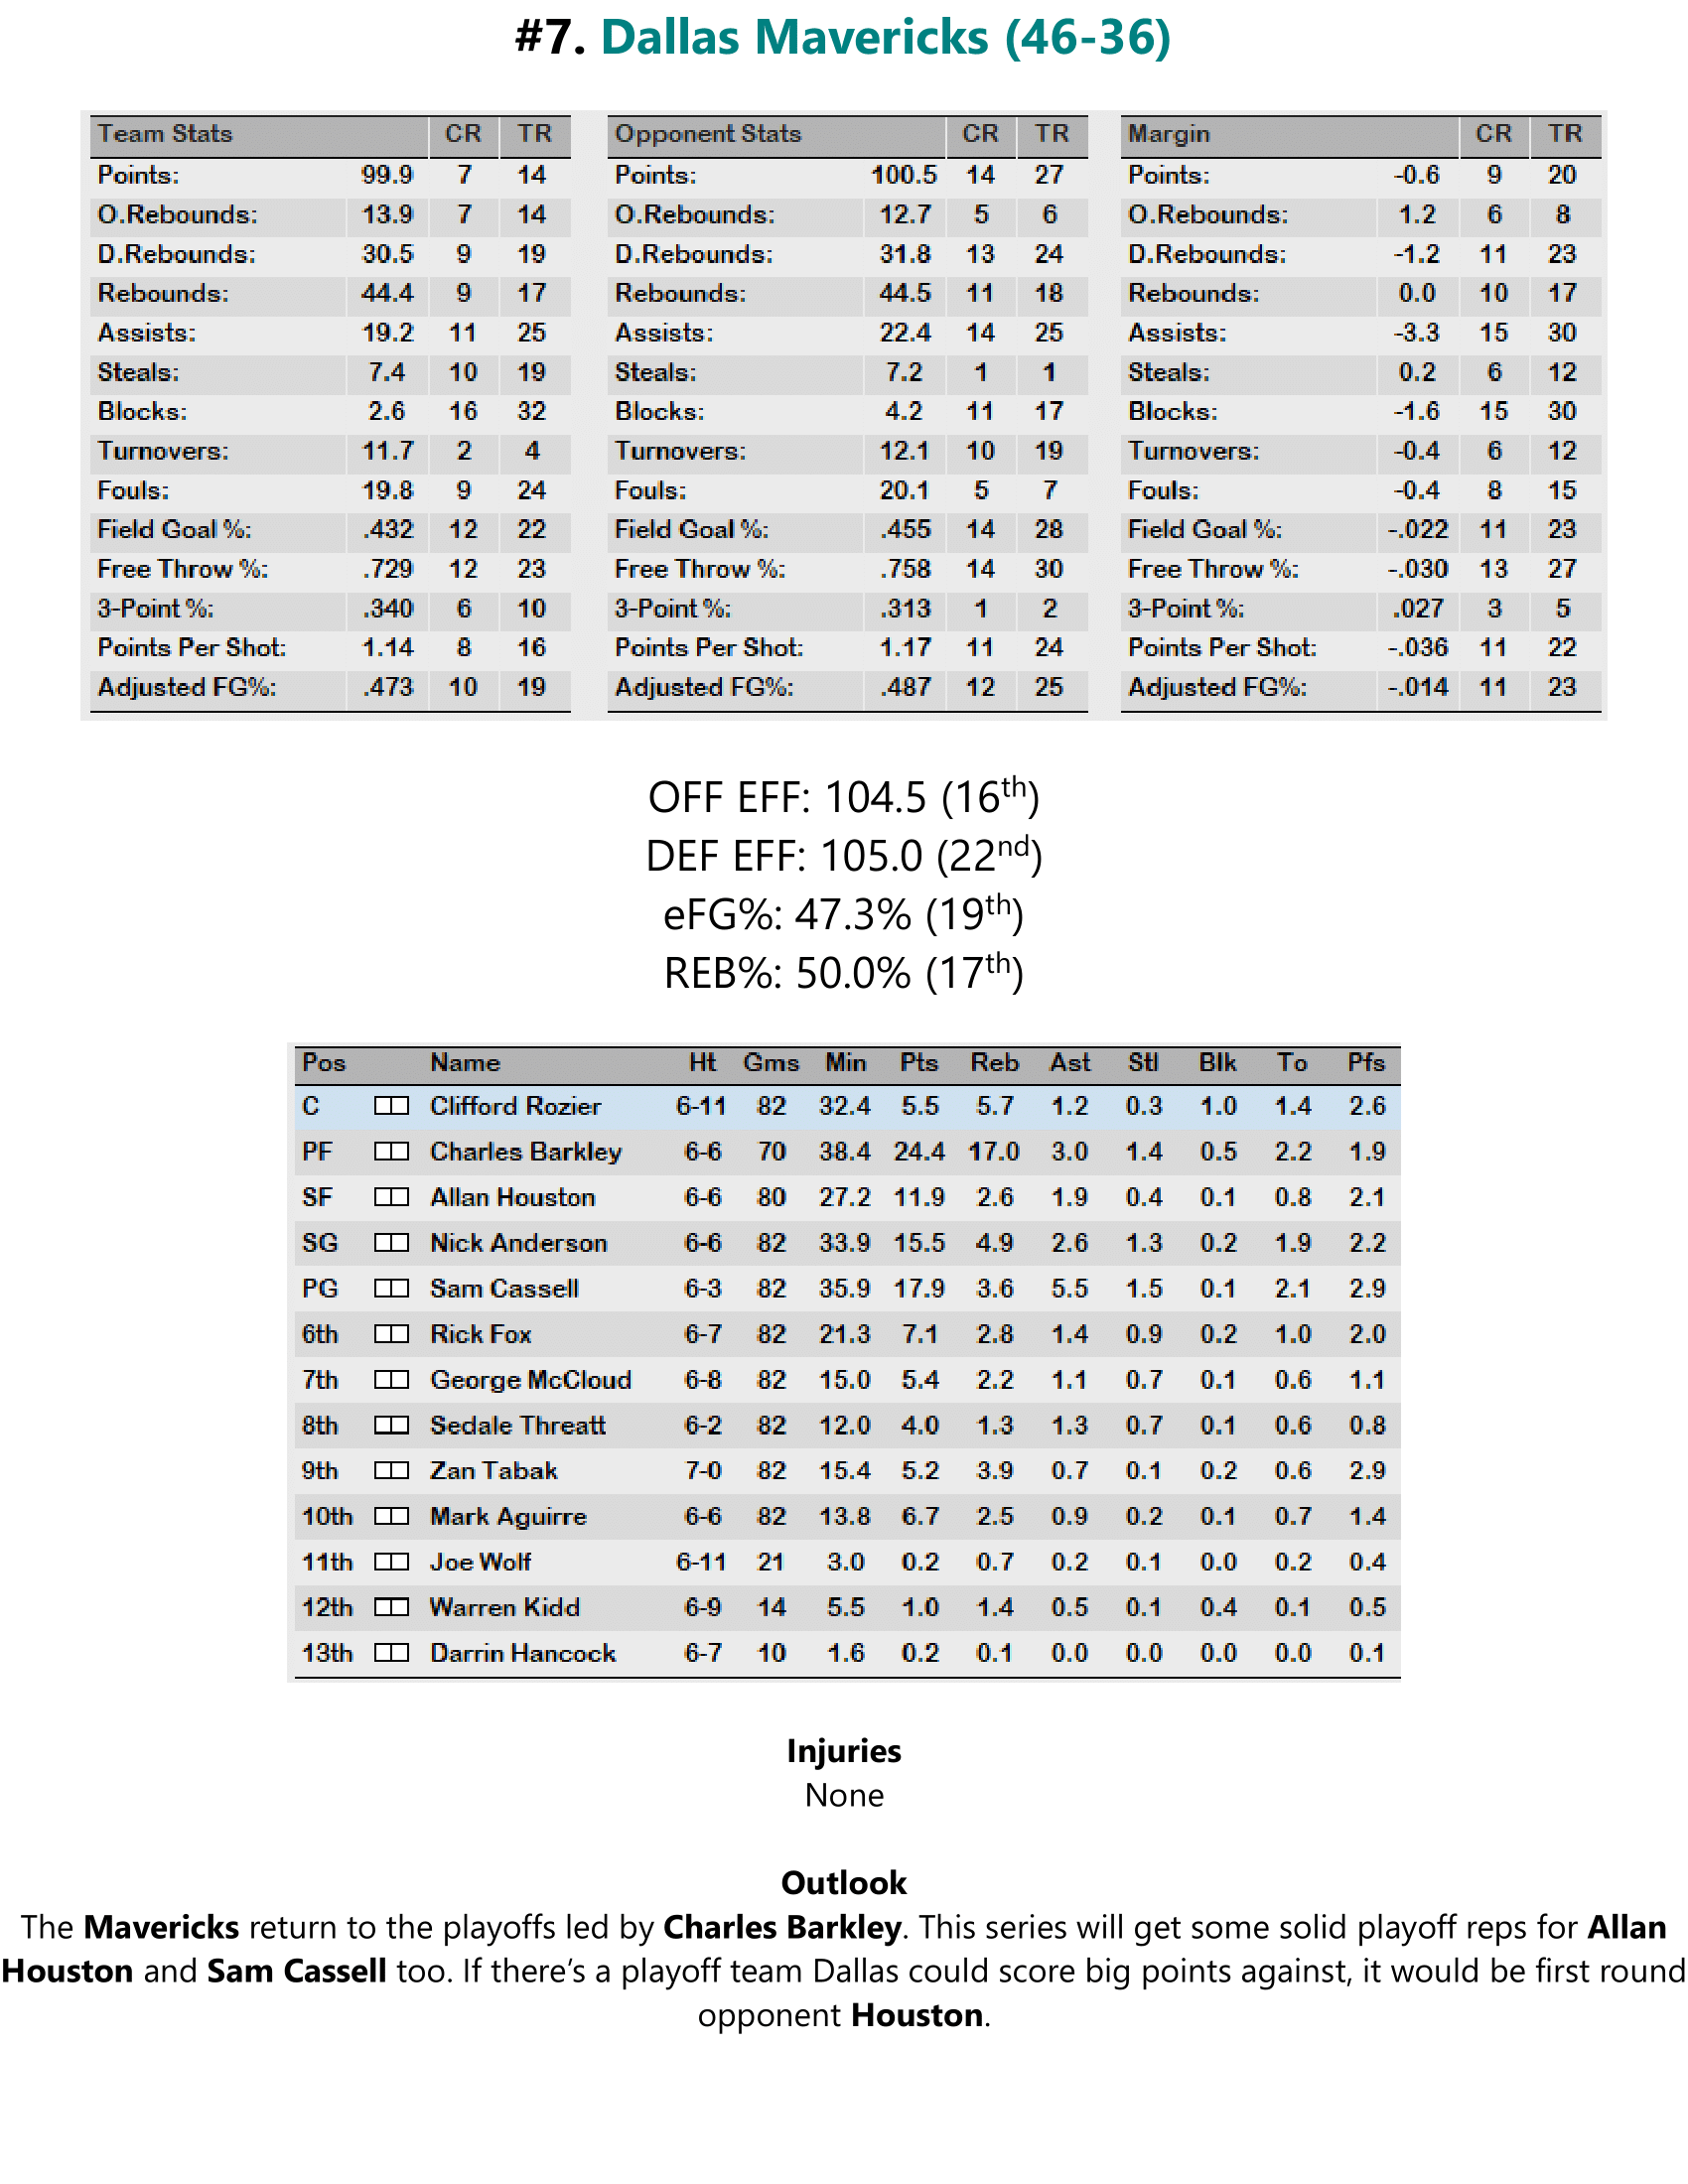 94-95-Part-3-Playoff-Preview-08.png